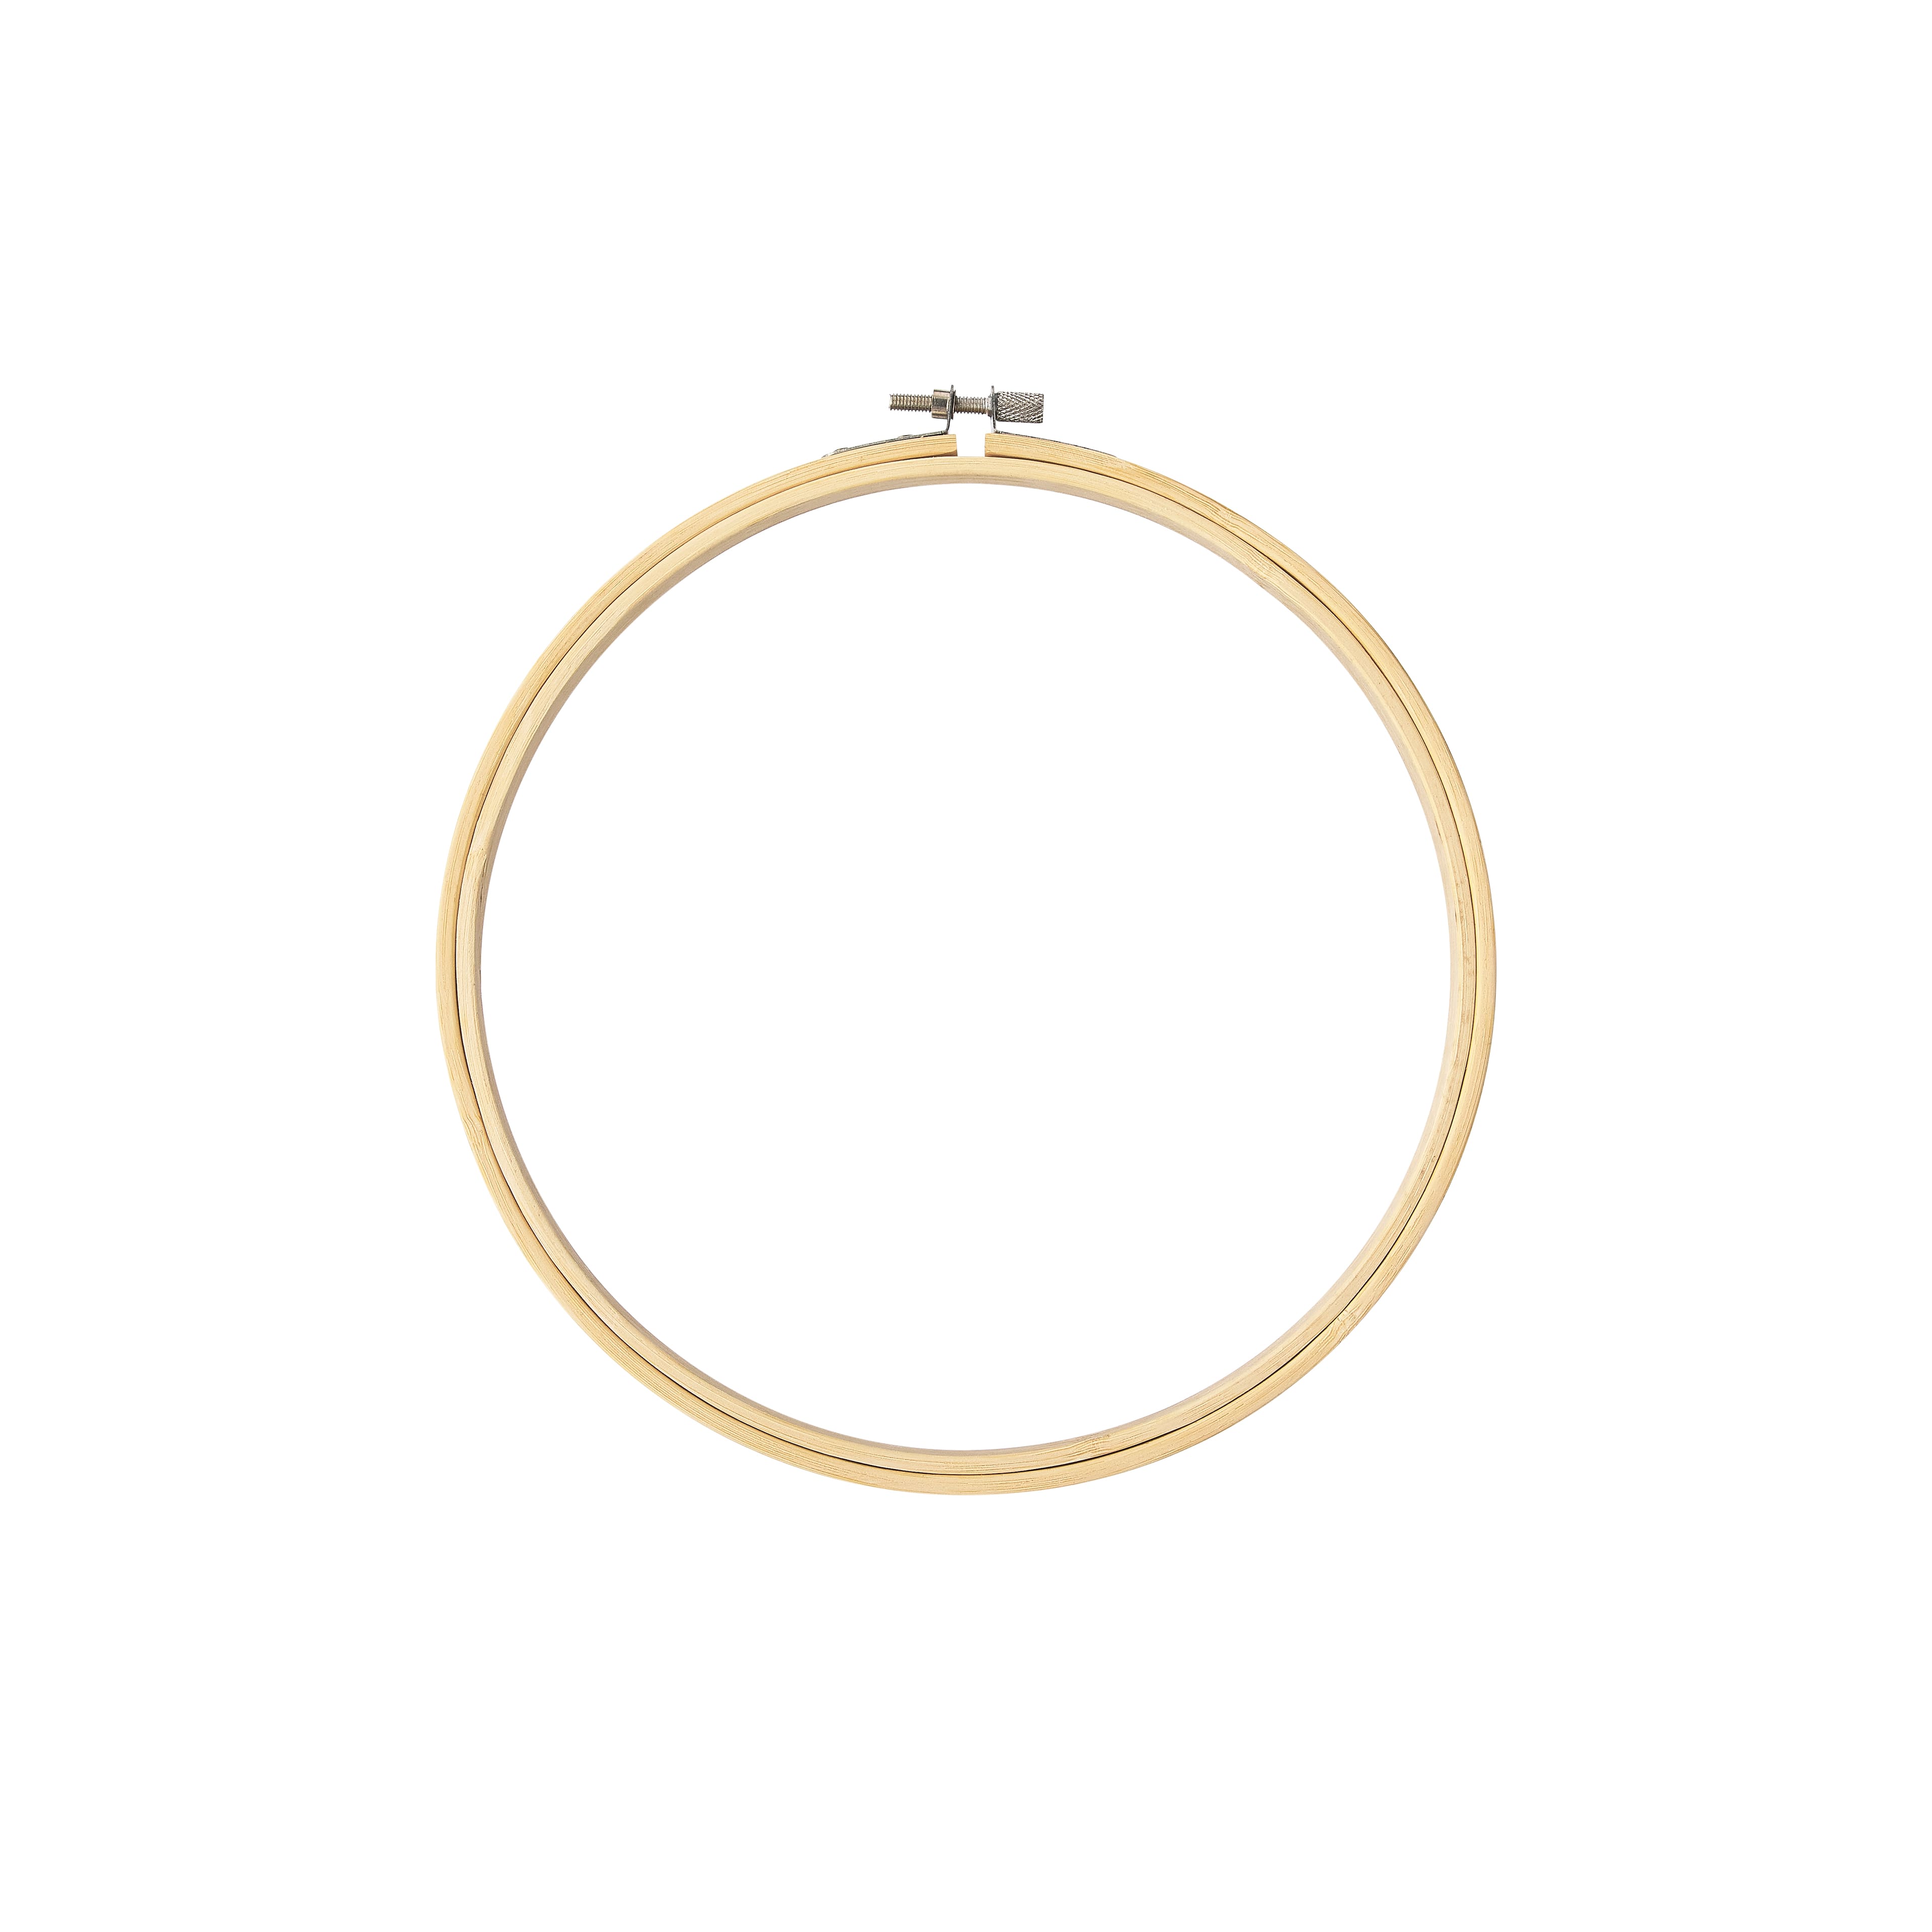 Aoibrloy 3 Pieces Embroidery Hoop 12 Inch Large Cross Stitch Hoop Round  Wood Embroidery Hoop For Sewing